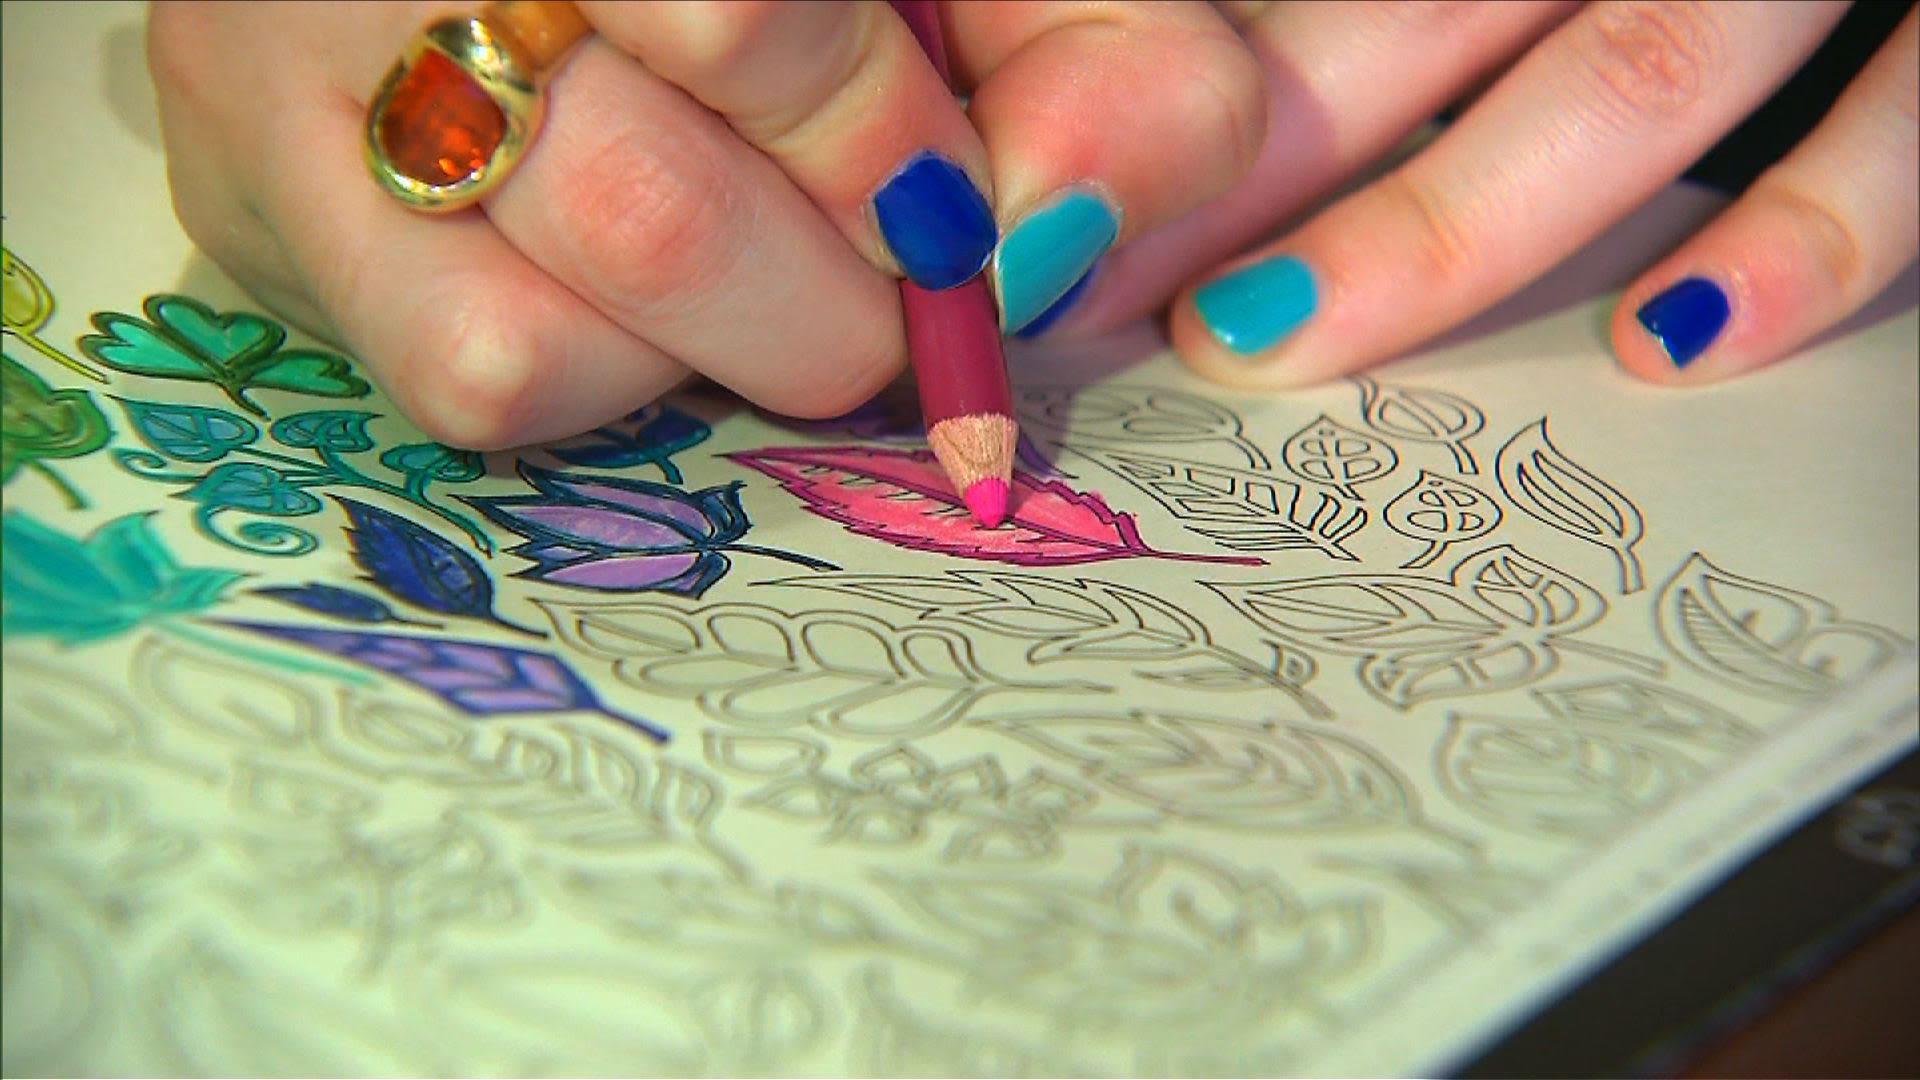 Top 10 Reasons Why Adults Need Their Own Adult Coloring Books - Art With  Jenny K.